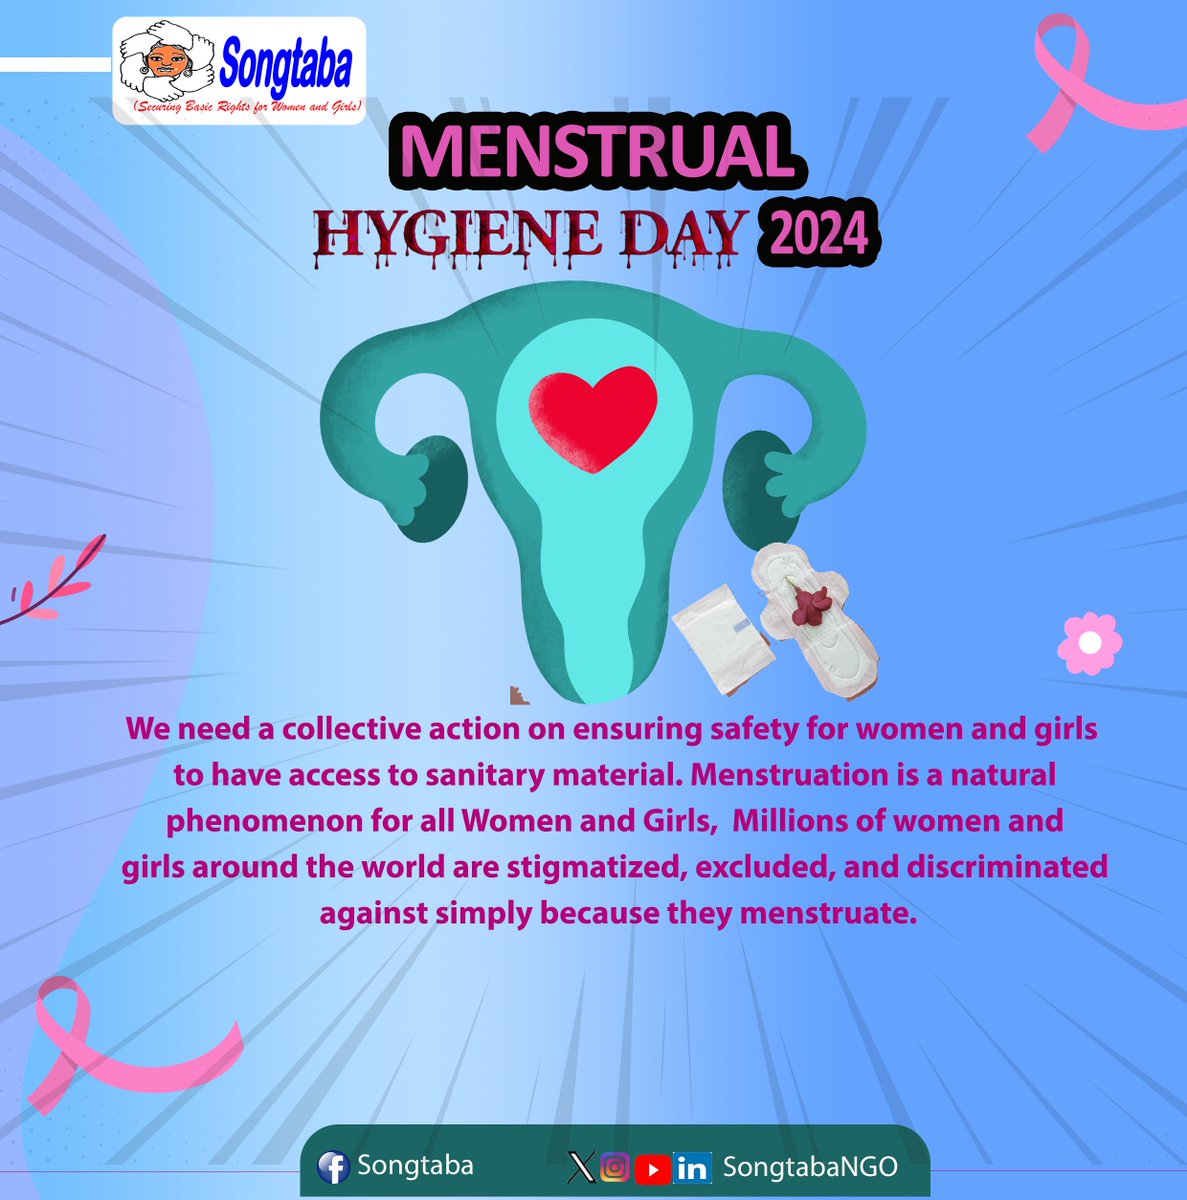 Let's raise our voices to demand better access to menstrual products and education for all women and girls. #mensuralhygieneday #endperiodstigma @planghana @SheLeads @ActionAidGhana @LamnatuAdam @MoGCSP_Ghana @PowerToYouthGh